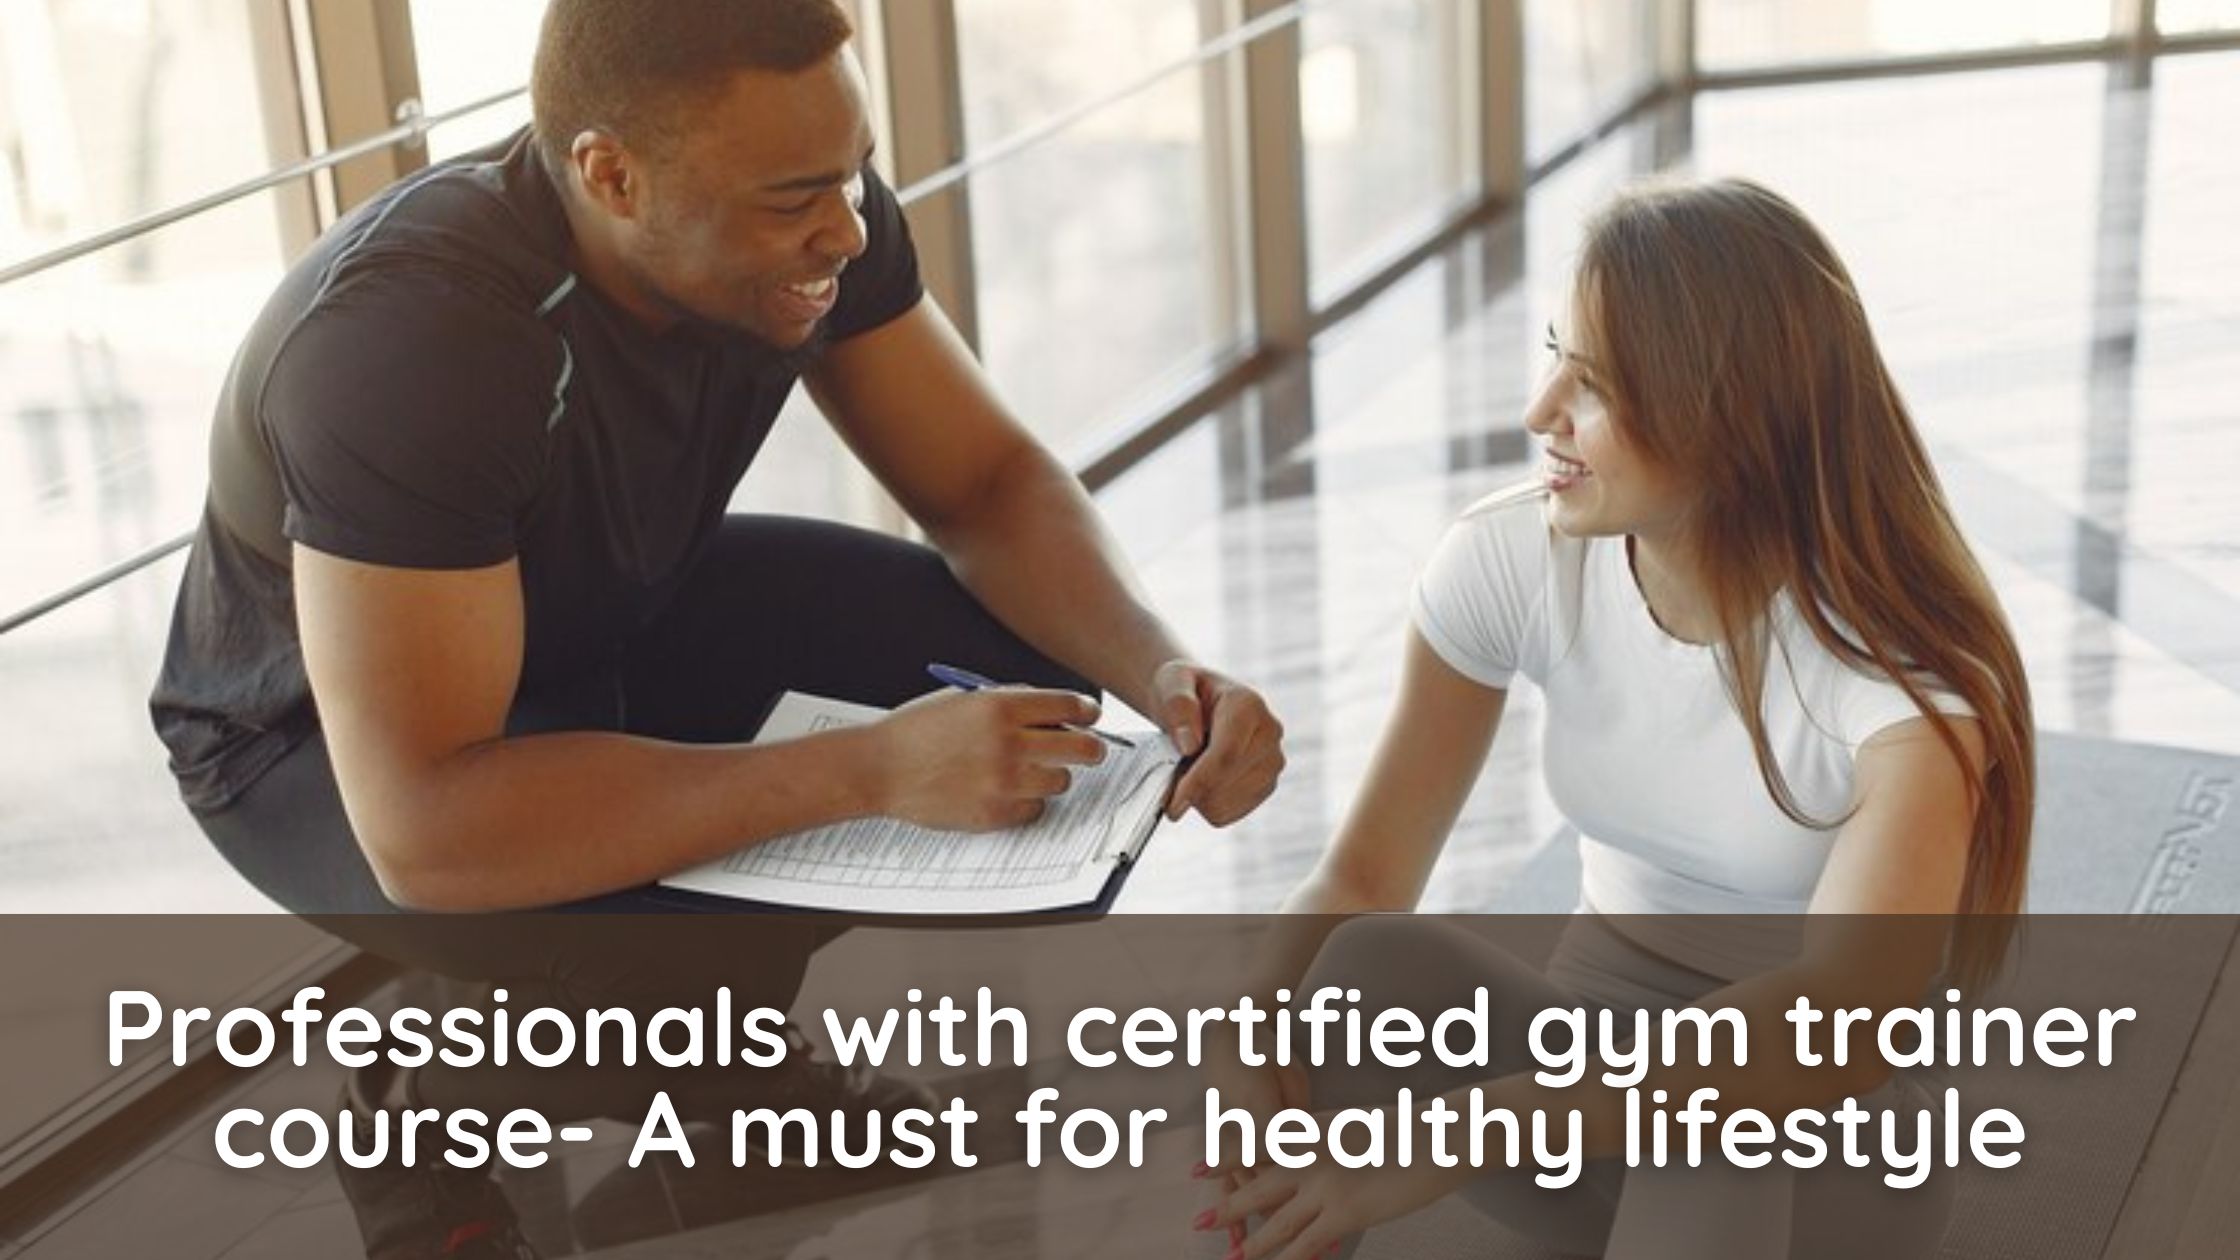 Professionals with certified gym trainer course- A must for healthy lifestyle